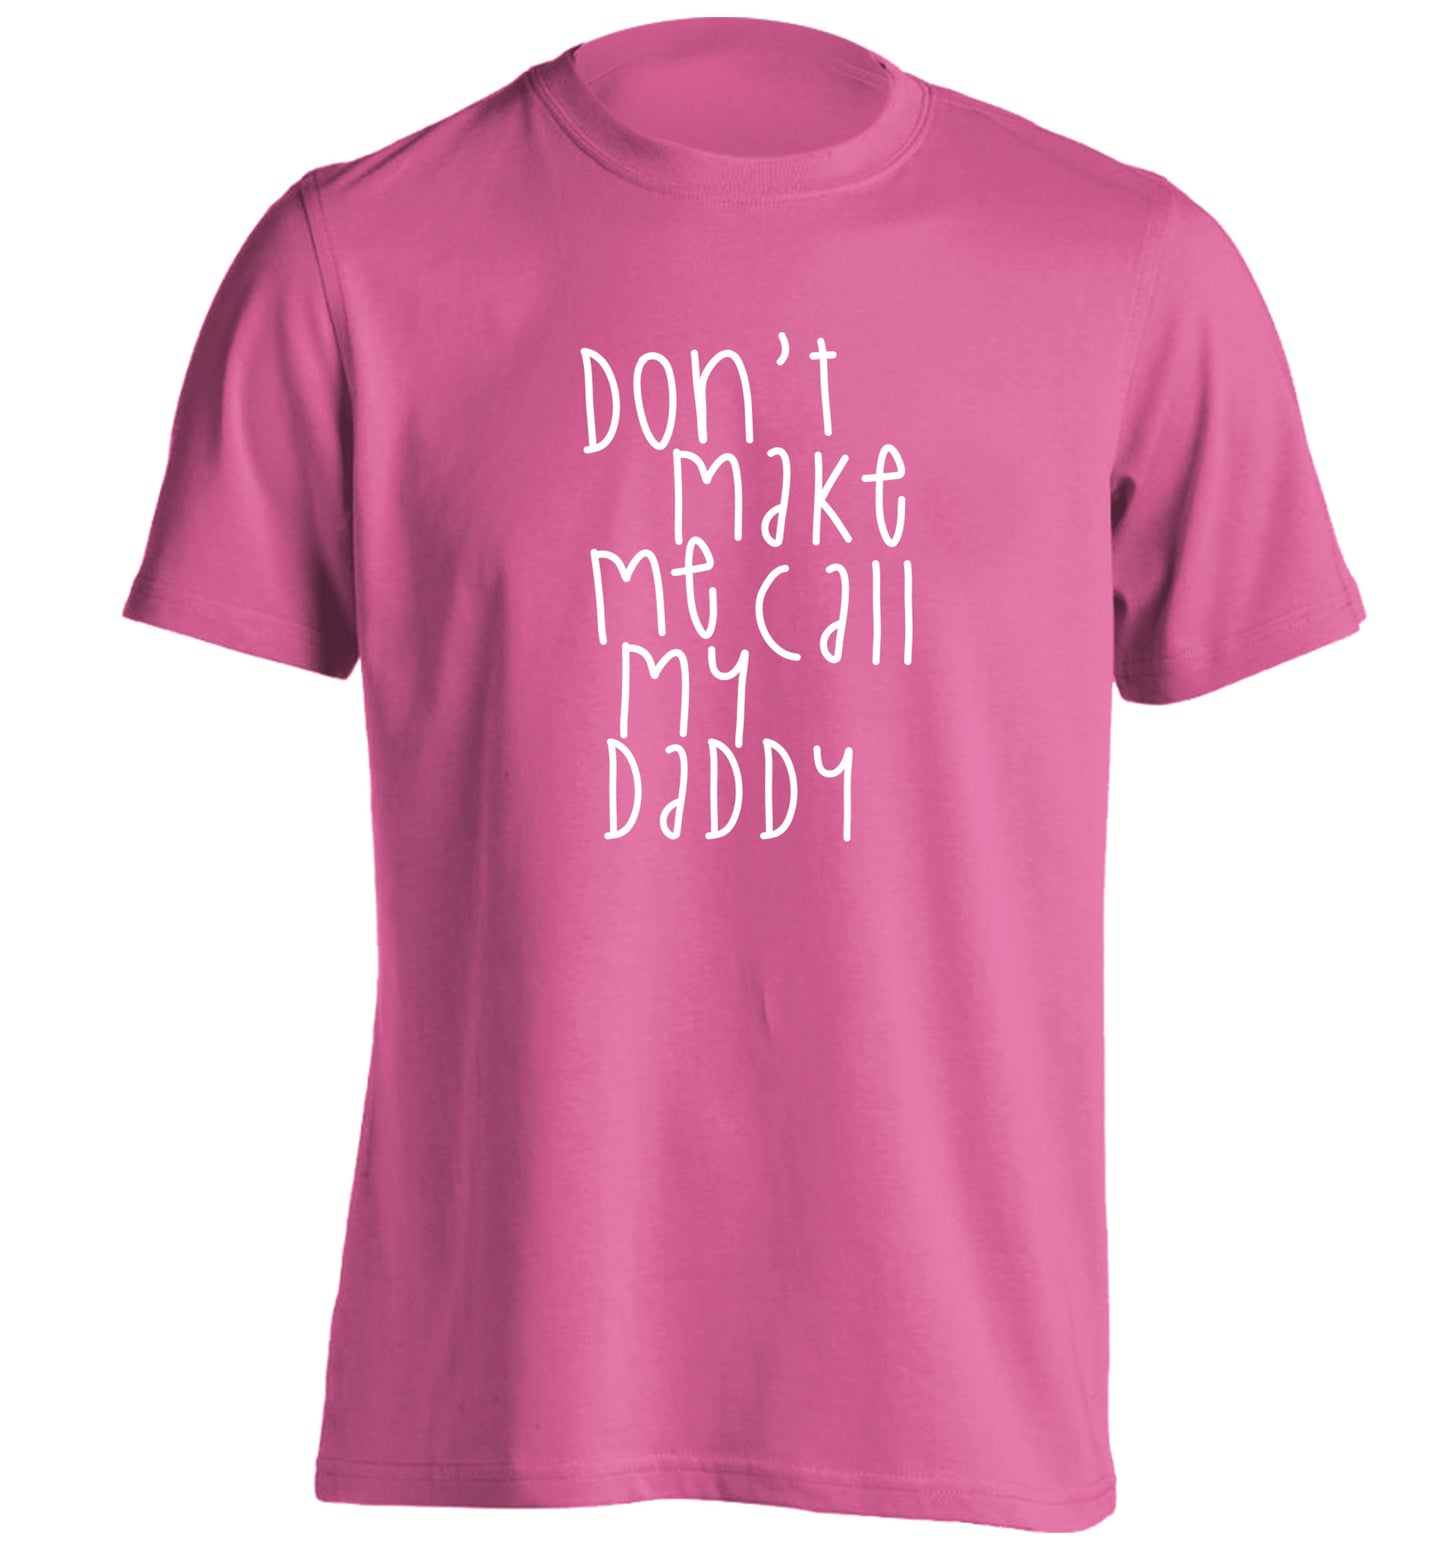 Don't make me call my daddy adults unisex pink Tshirt 2XL